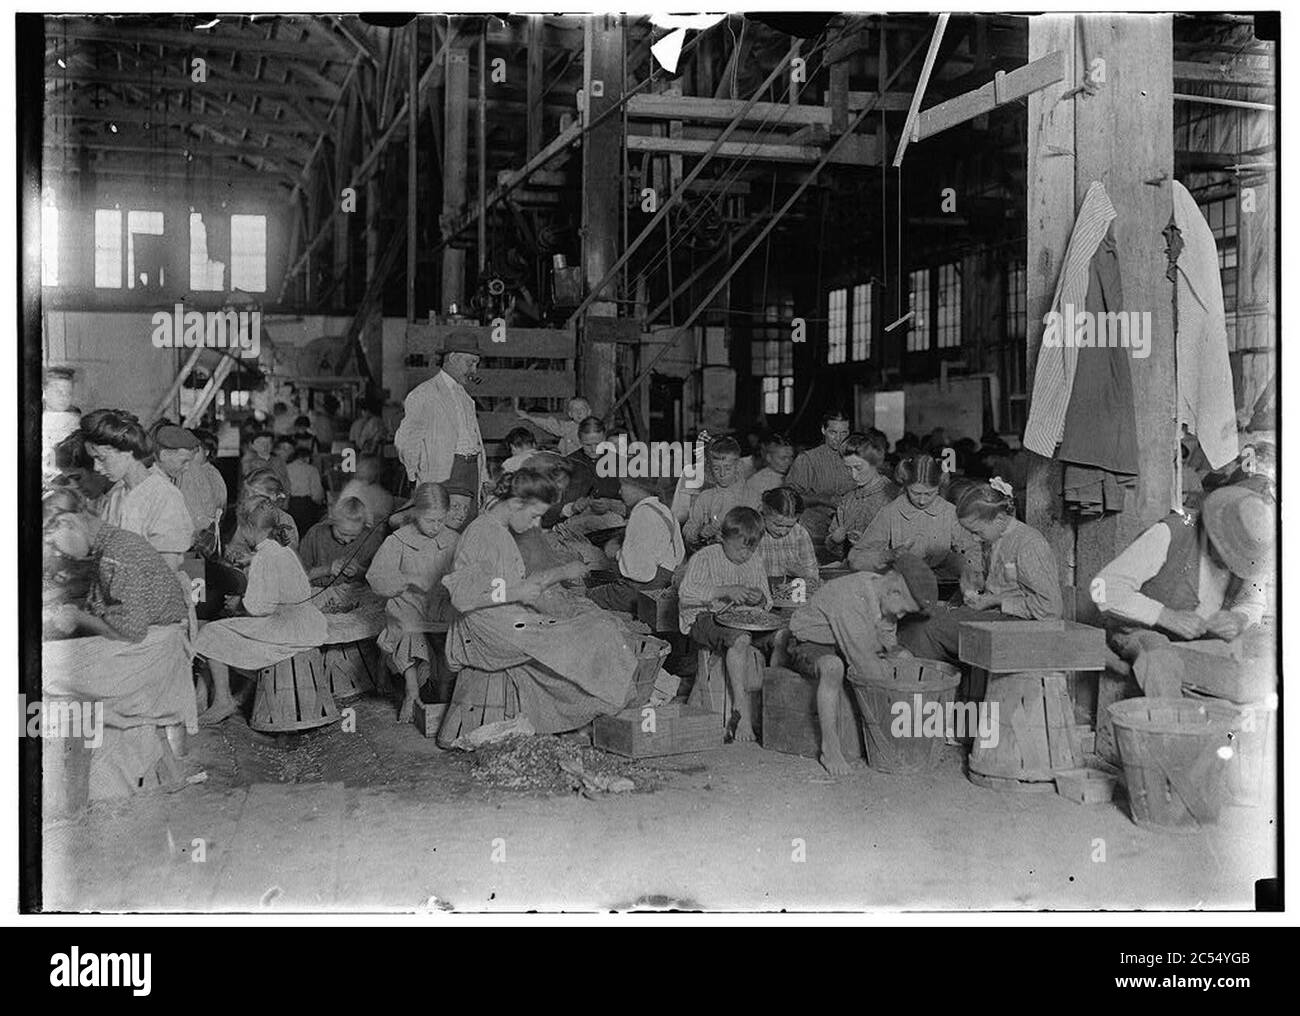 Interior of J. S. Farrand Packing Company, Baltimore, Md. Many tiny workers. Babies are held on laps of workers, or stowed away in empty boxes. Stock Photo